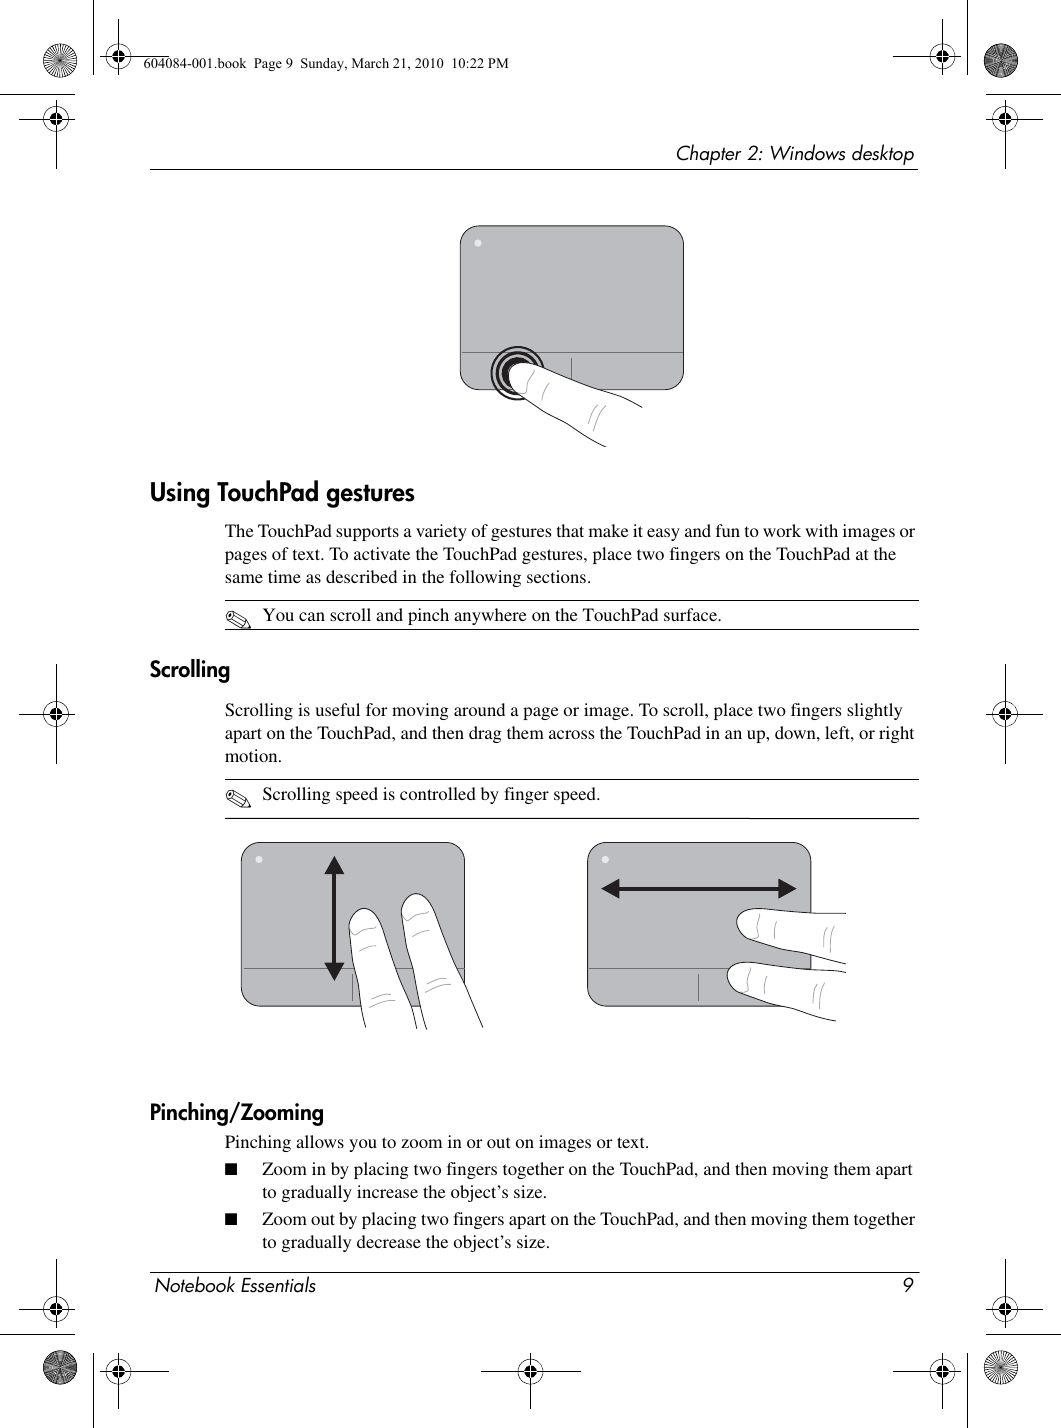 Notebook Essentials 9Chapter 2: Windows desktopUsing TouchPad gesturesThe TouchPad supports a variety of gestures that make it easy and fun to work with images or pages of text. To activate the TouchPad gestures, place two fingers on the TouchPad at the same time as described in the following sections. ✎You can scroll and pinch anywhere on the TouchPad surface.ScrollingScrolling is useful for moving around a page or image. To scroll, place two fingers slightly apart on the TouchPad, and then drag them across the TouchPad in an up, down, left, or right motion.✎Scrolling speed is controlled by finger speed.Pinching/ZoomingPinching allows you to zoom in or out on images or text.■Zoom in by placing two fingers together on the TouchPad, and then moving them apart to gradually increase the object’s size.■Zoom out by placing two fingers apart on the TouchPad, and then moving them together to gradually decrease the object’s size.604084-001.book  Page 9  Sunday, March 21, 2010  10:22 PM